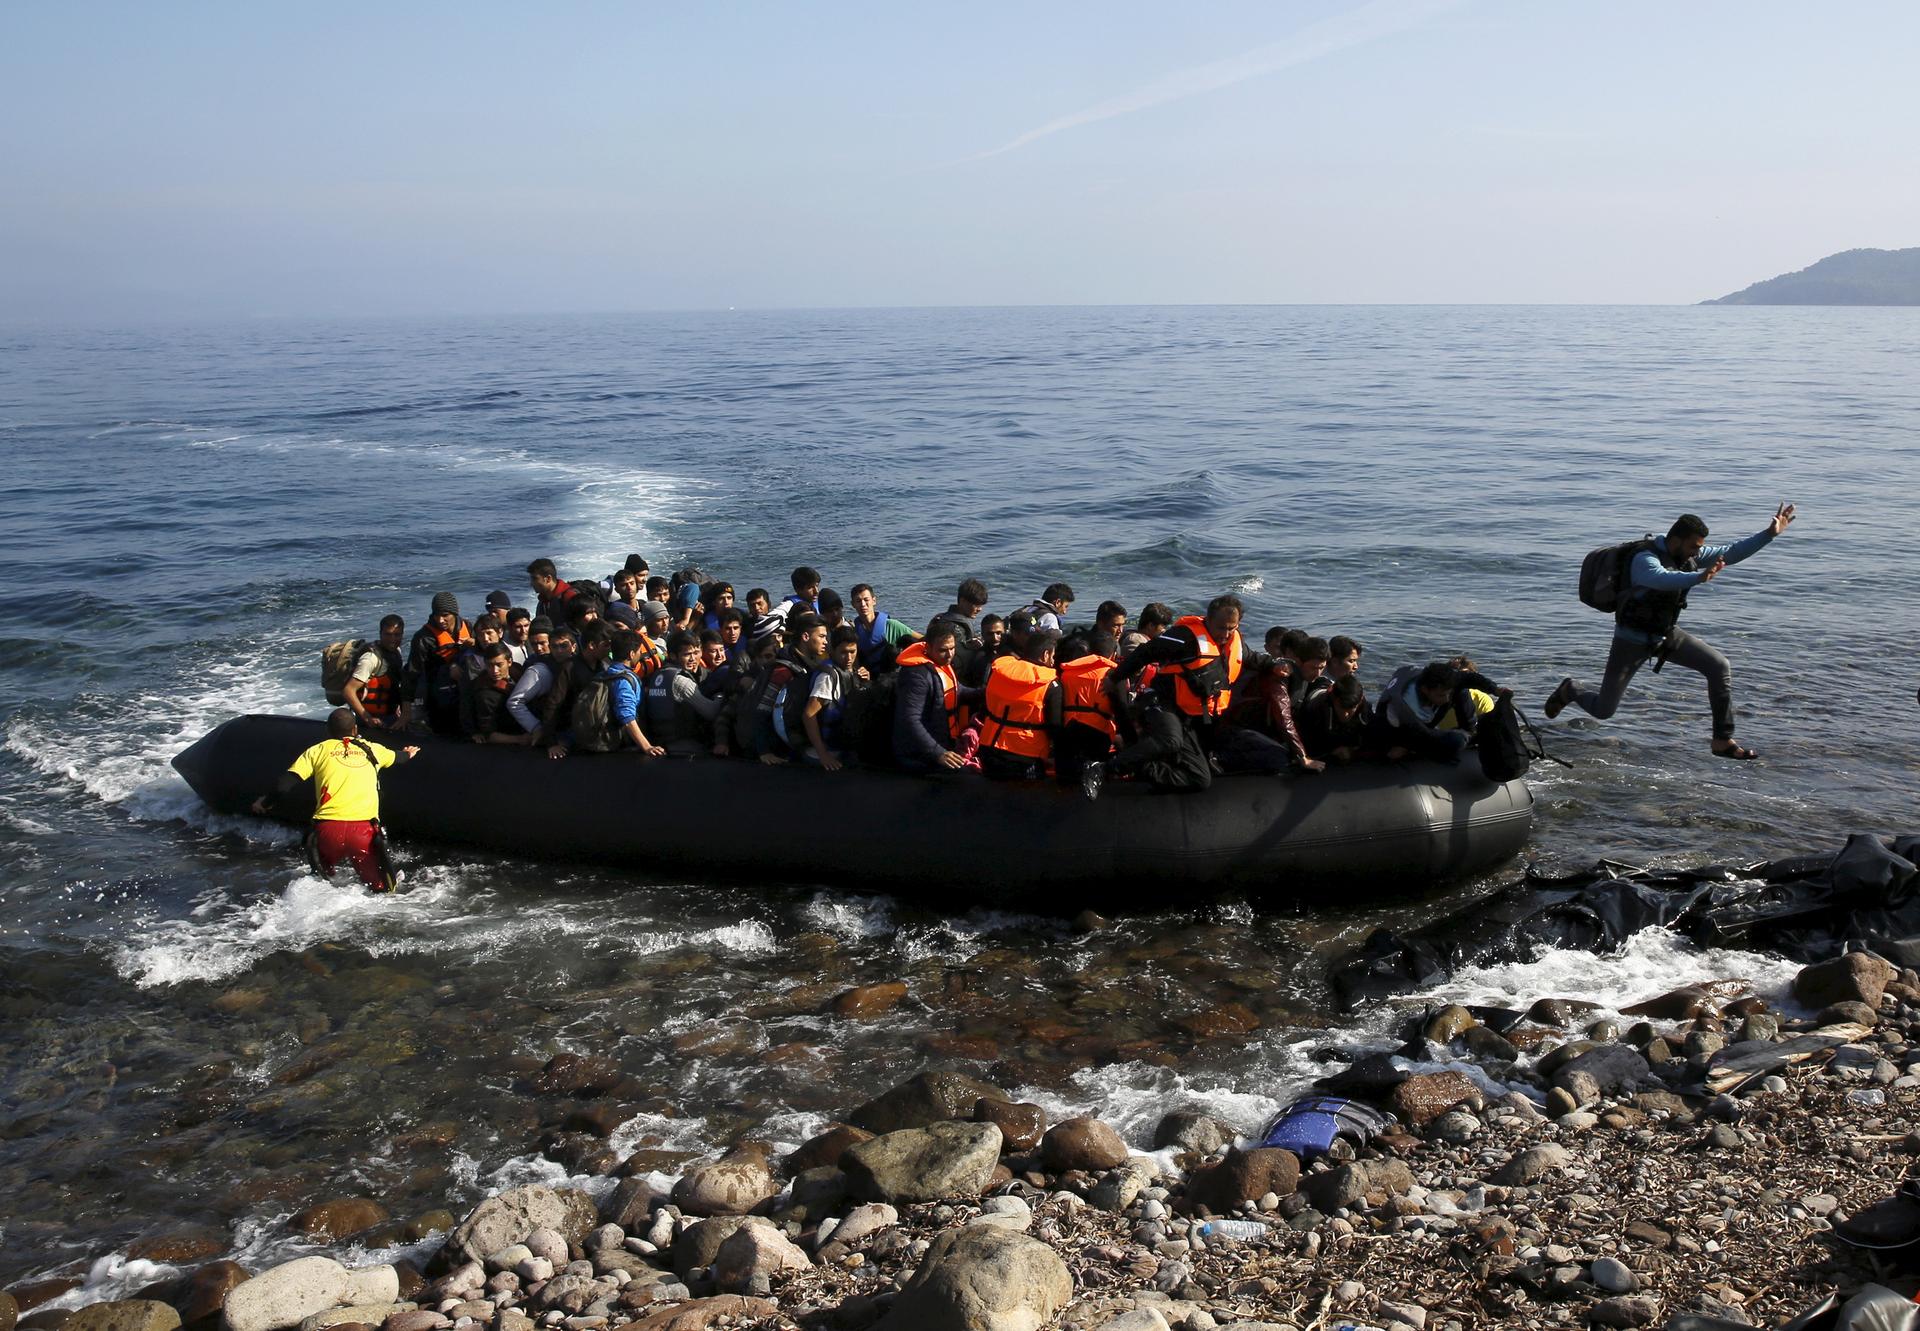 A migrant jumps off an overcrowded raft onto a beach on the Greek island of Lesbos, Oct. 19, 2015.